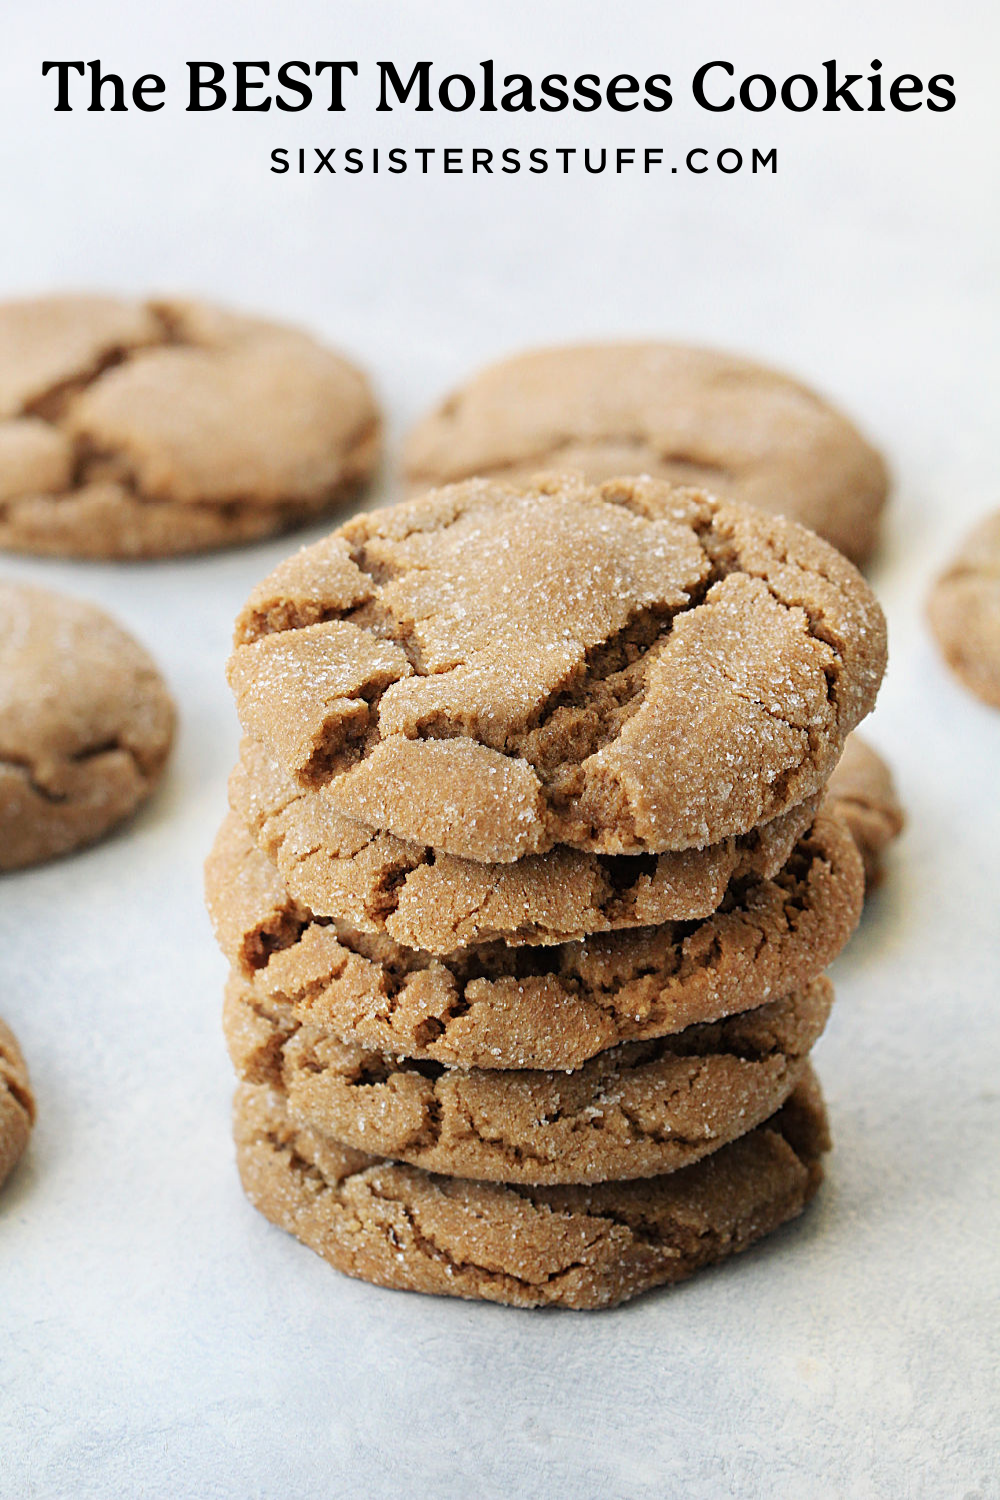 Molasses Cookies stacked